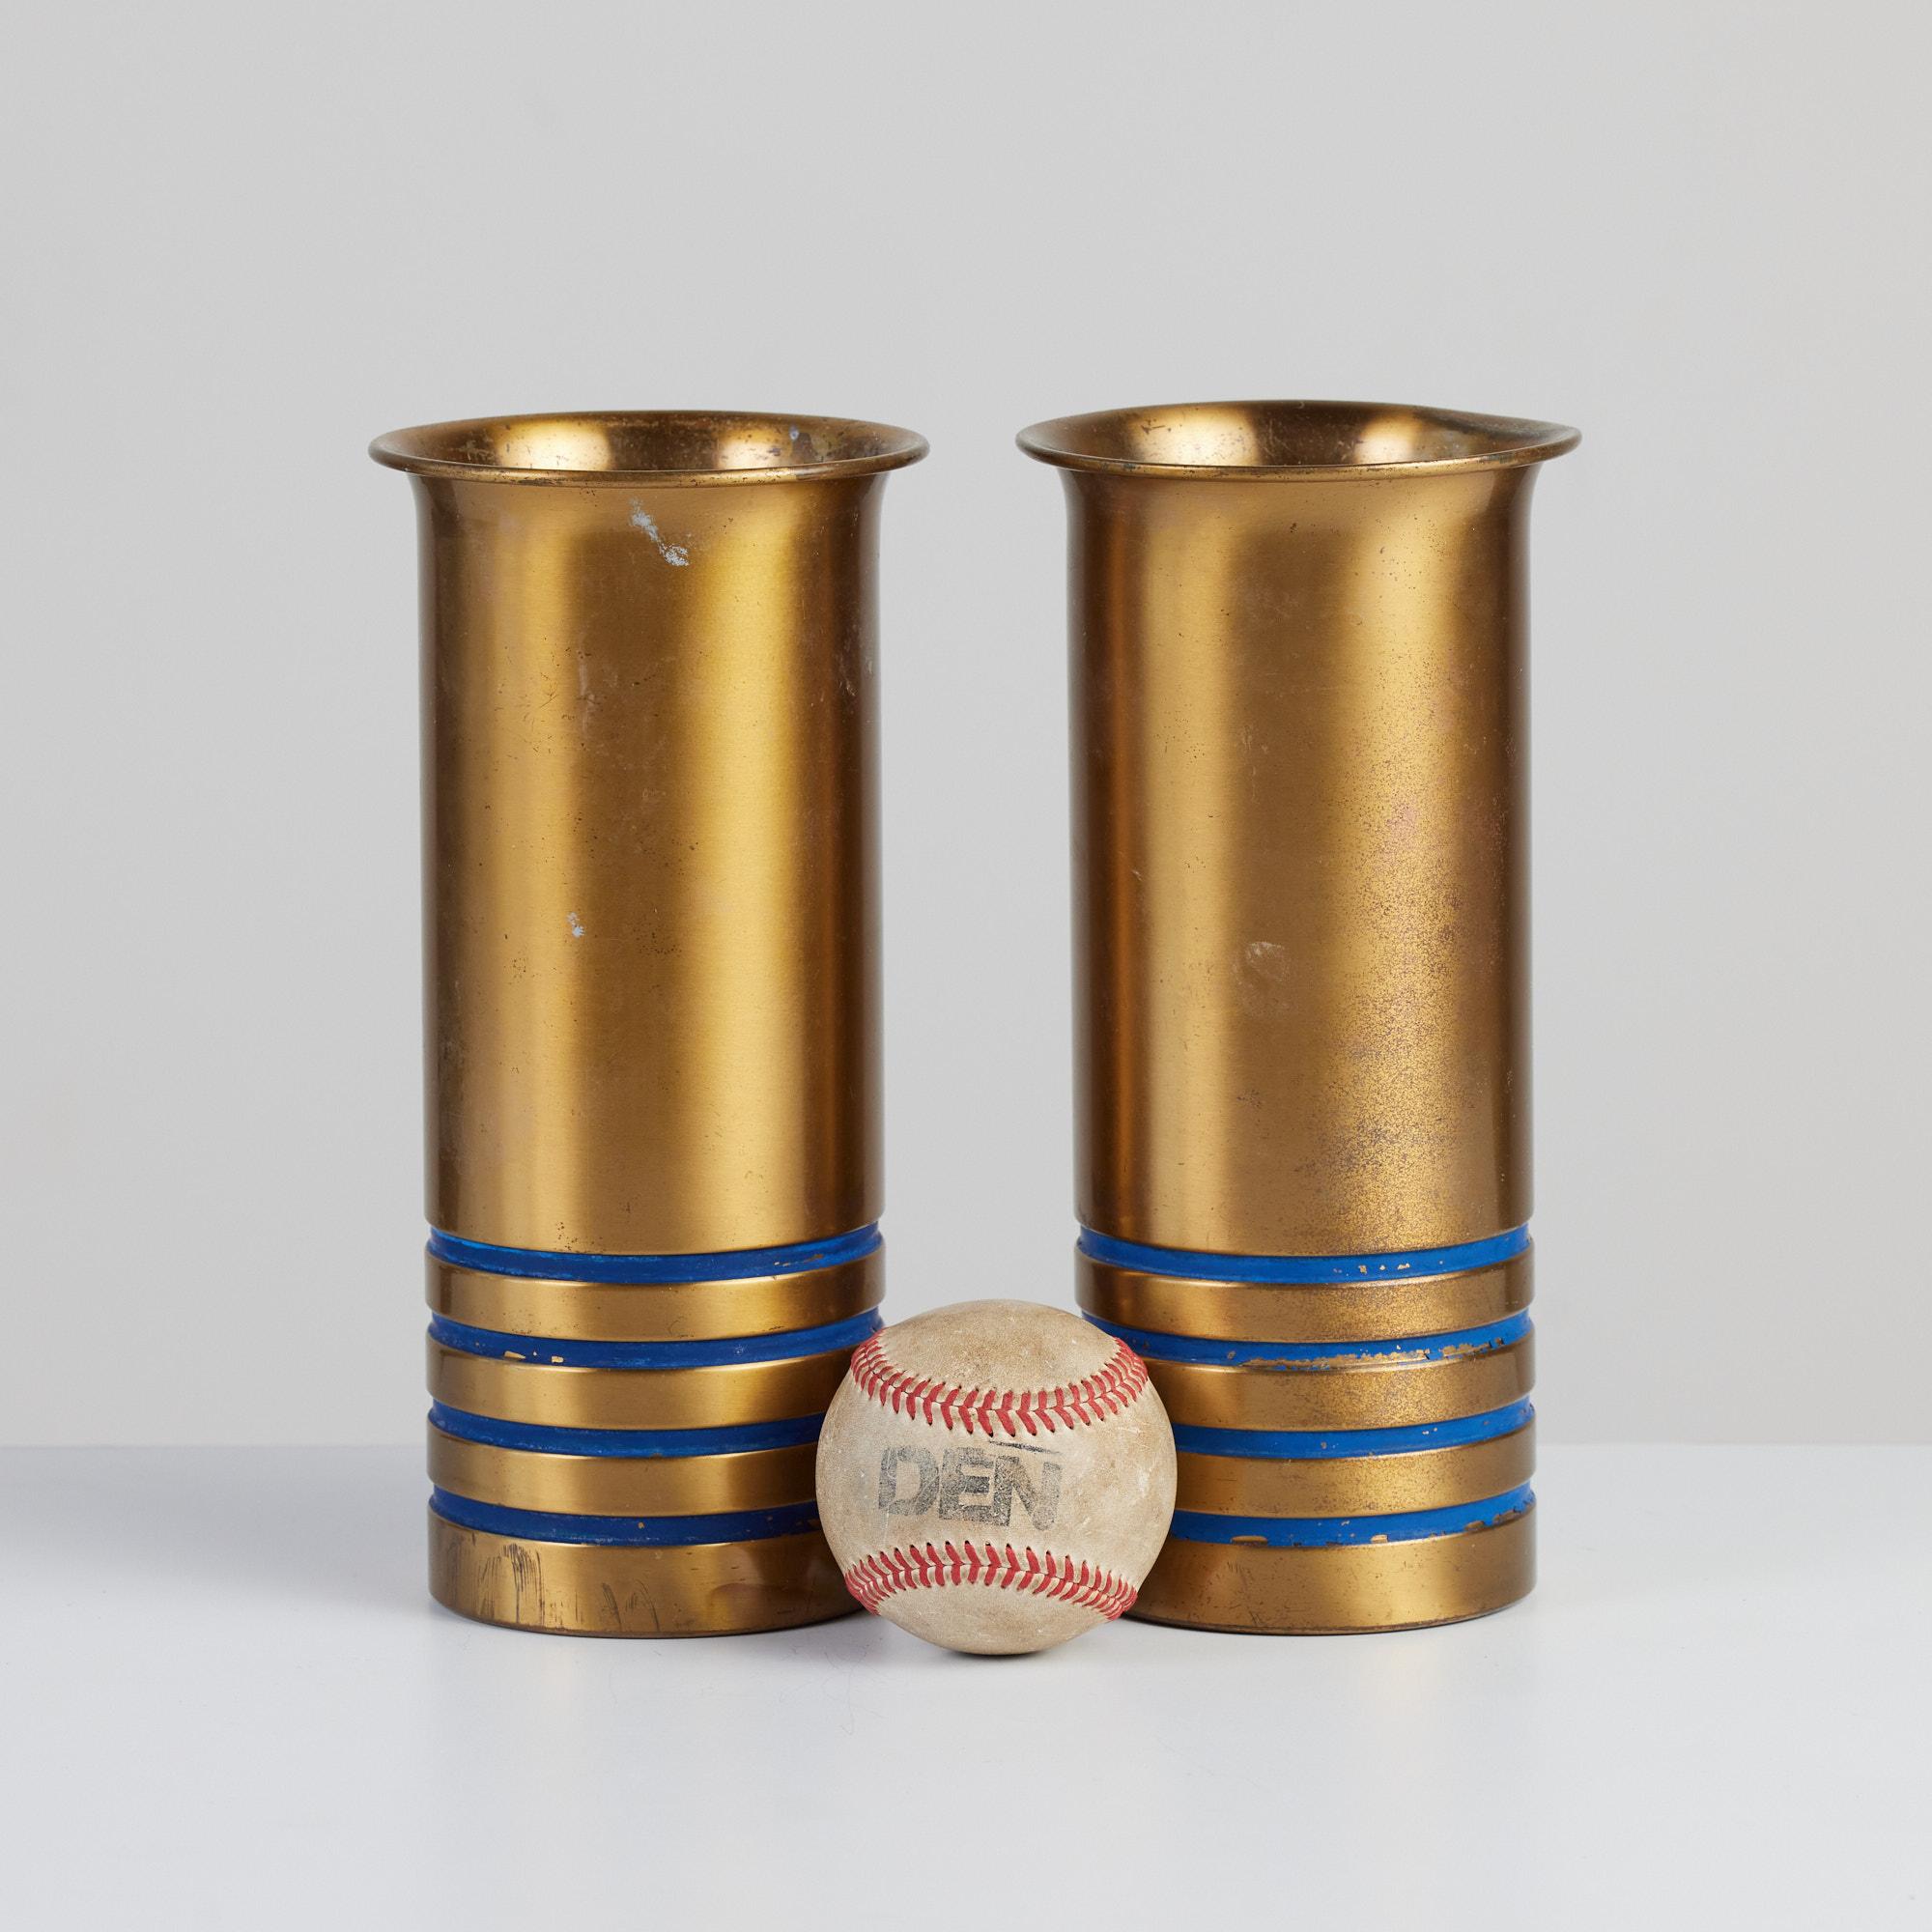 Pair of brass vases by Walter von Nessen for Chase, c.1930s, USA. The pair of solid patinated brass Art Deco vases feature a tulip opening and four incised rings around the bottom of the vessel in cobalt blue. They are impressed with [Chase] and